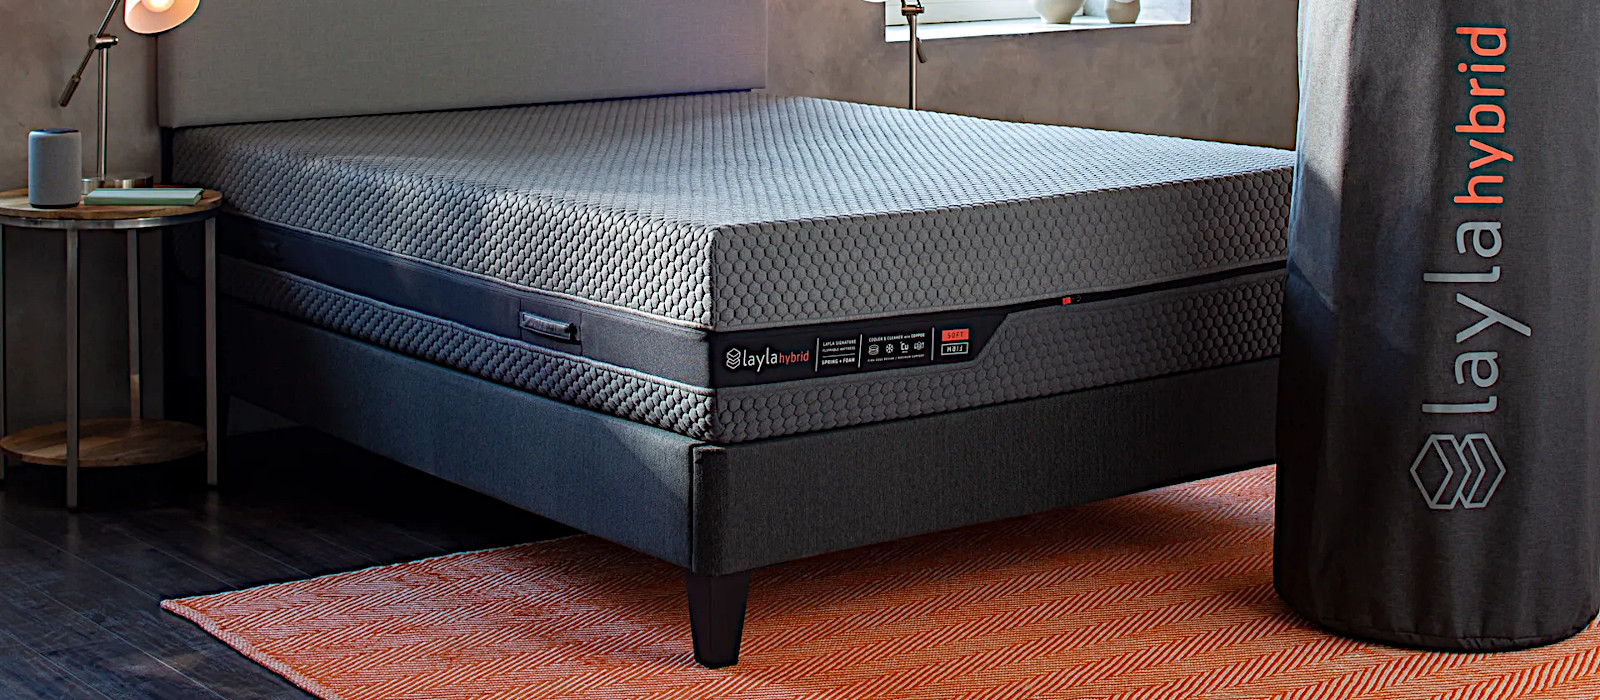 Low-cost copper infused flippable hybrid mattress